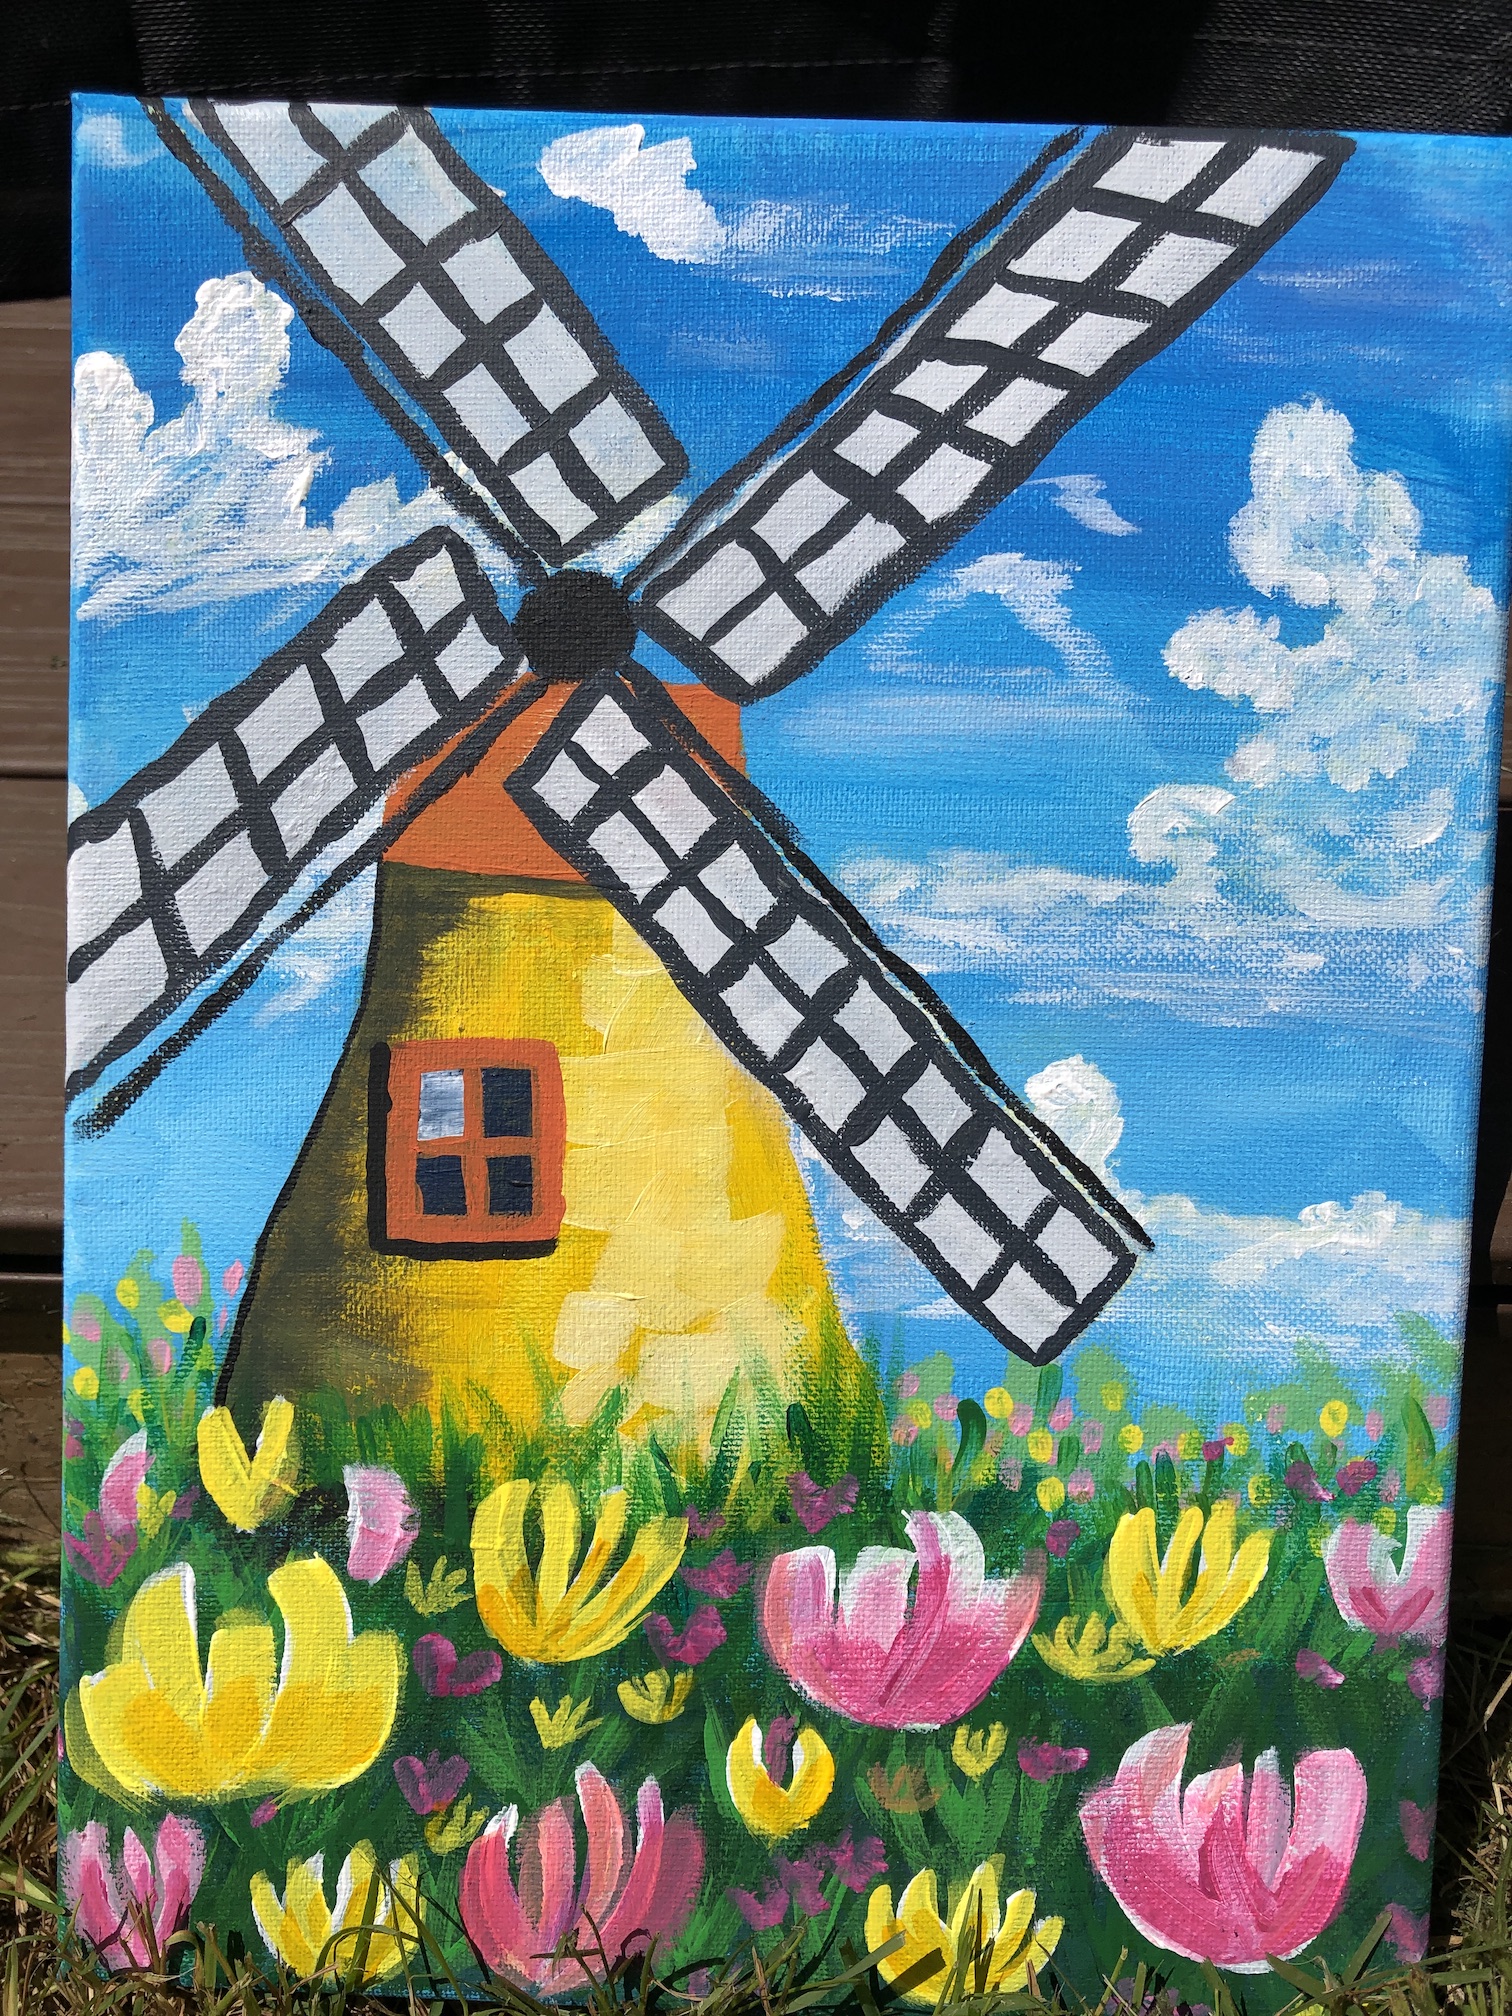 How To Paint With Acrylic On Canvas Windmill Tulips | The Art Sherpa